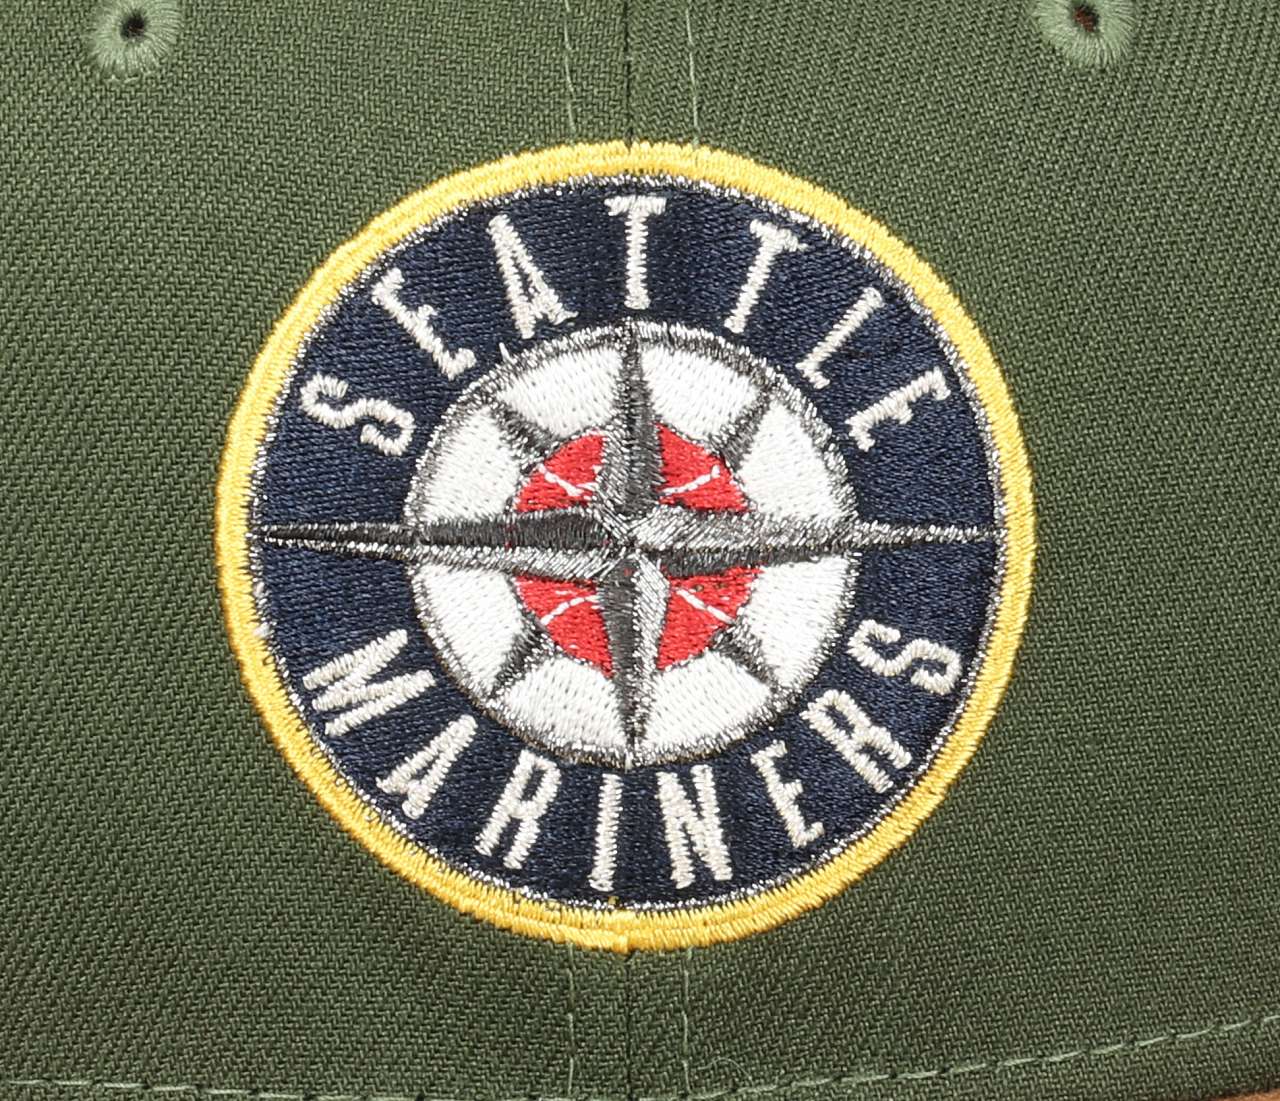 Seattle Mariners MLB Cooperstown 40th Anniversary Green Brown 59Fifty Basecap New Era